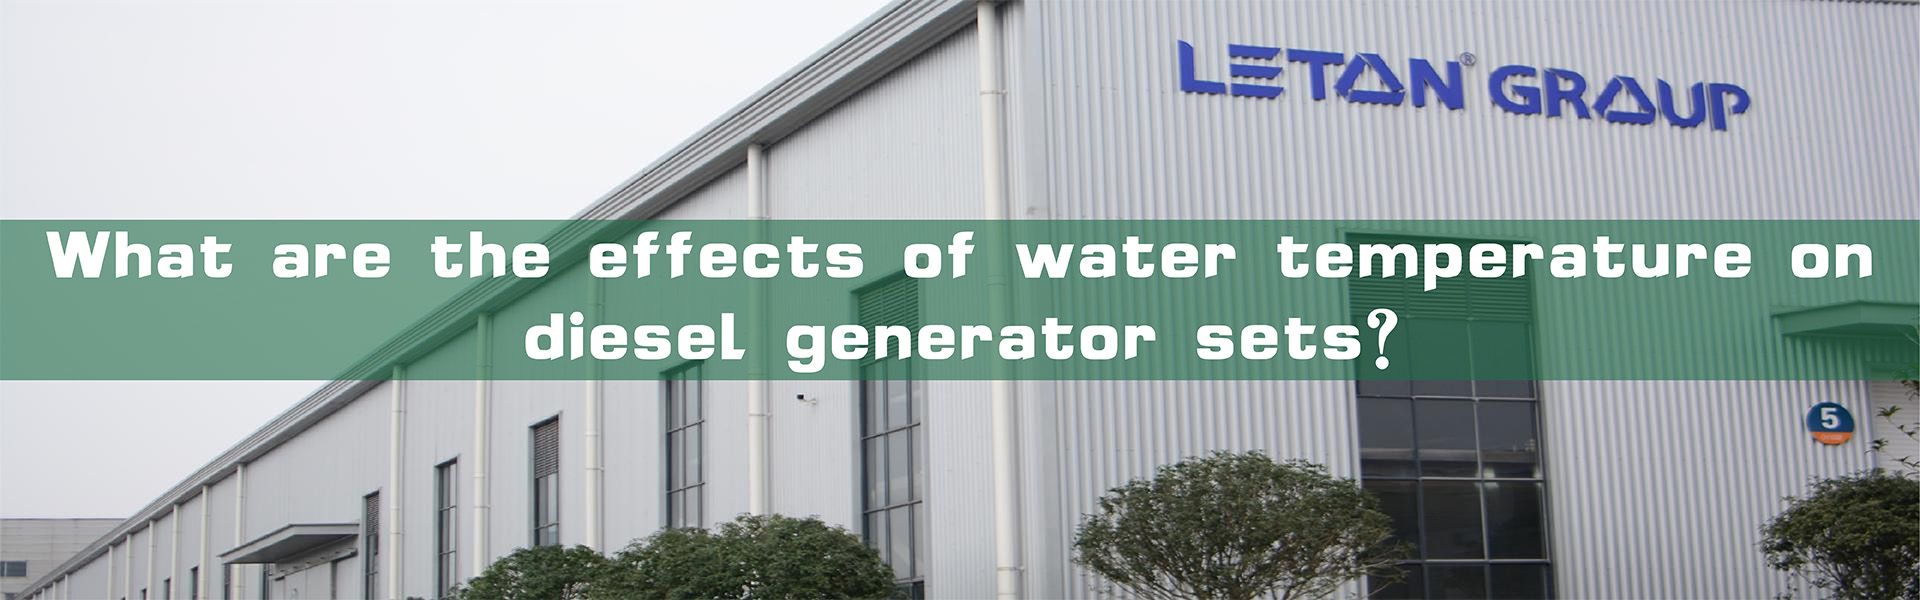 What are the effects of water temperature on diesel generator sets?